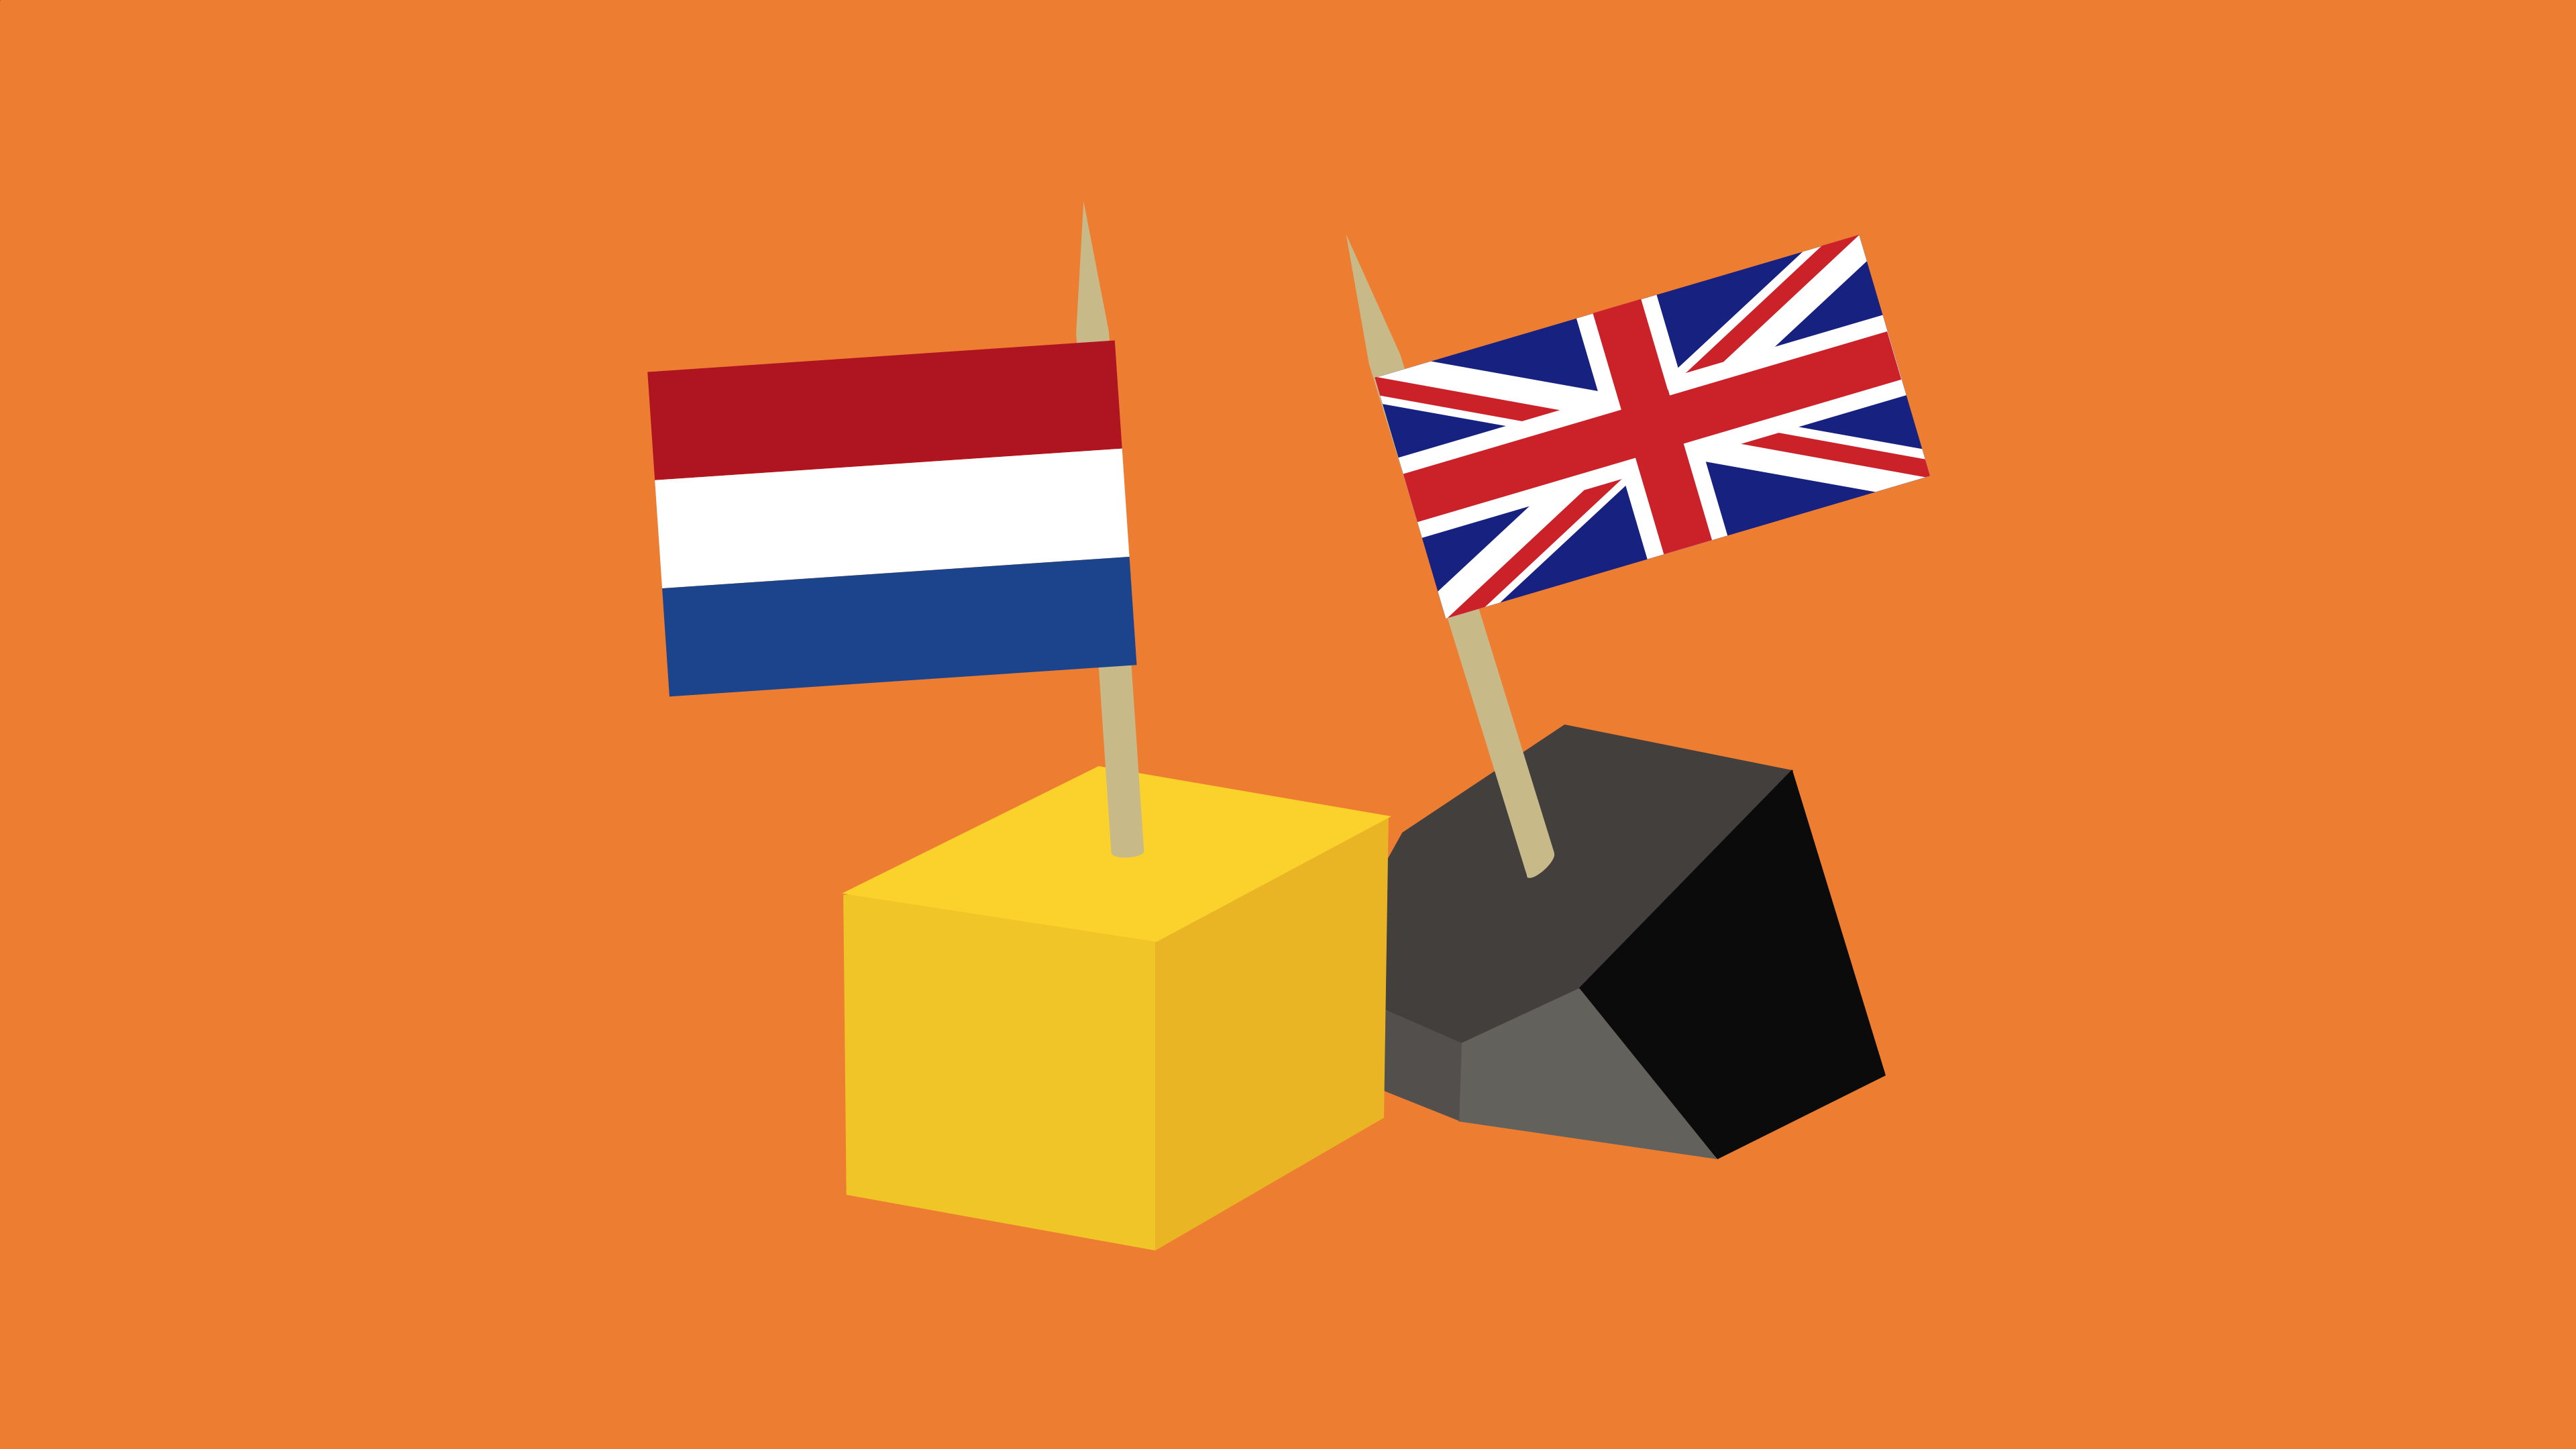 Cheese and a piece of coal with Dutch and British flags, presumably served during Friday afternoon drinks
